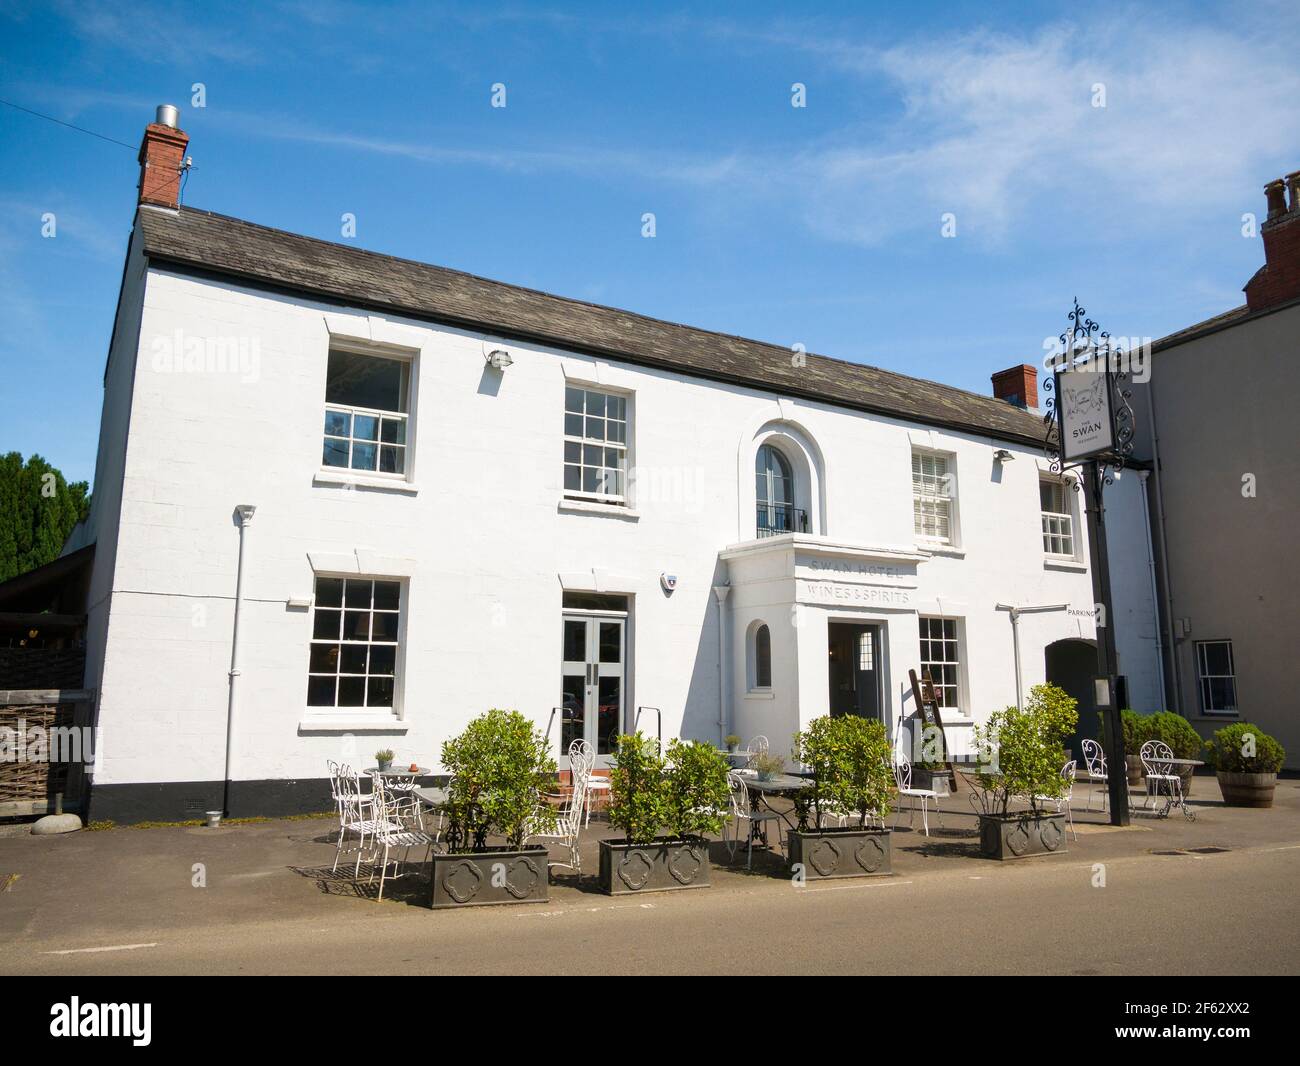 The Swan Hotel in the village of Wedmore, Somerset, England. Stock Photo